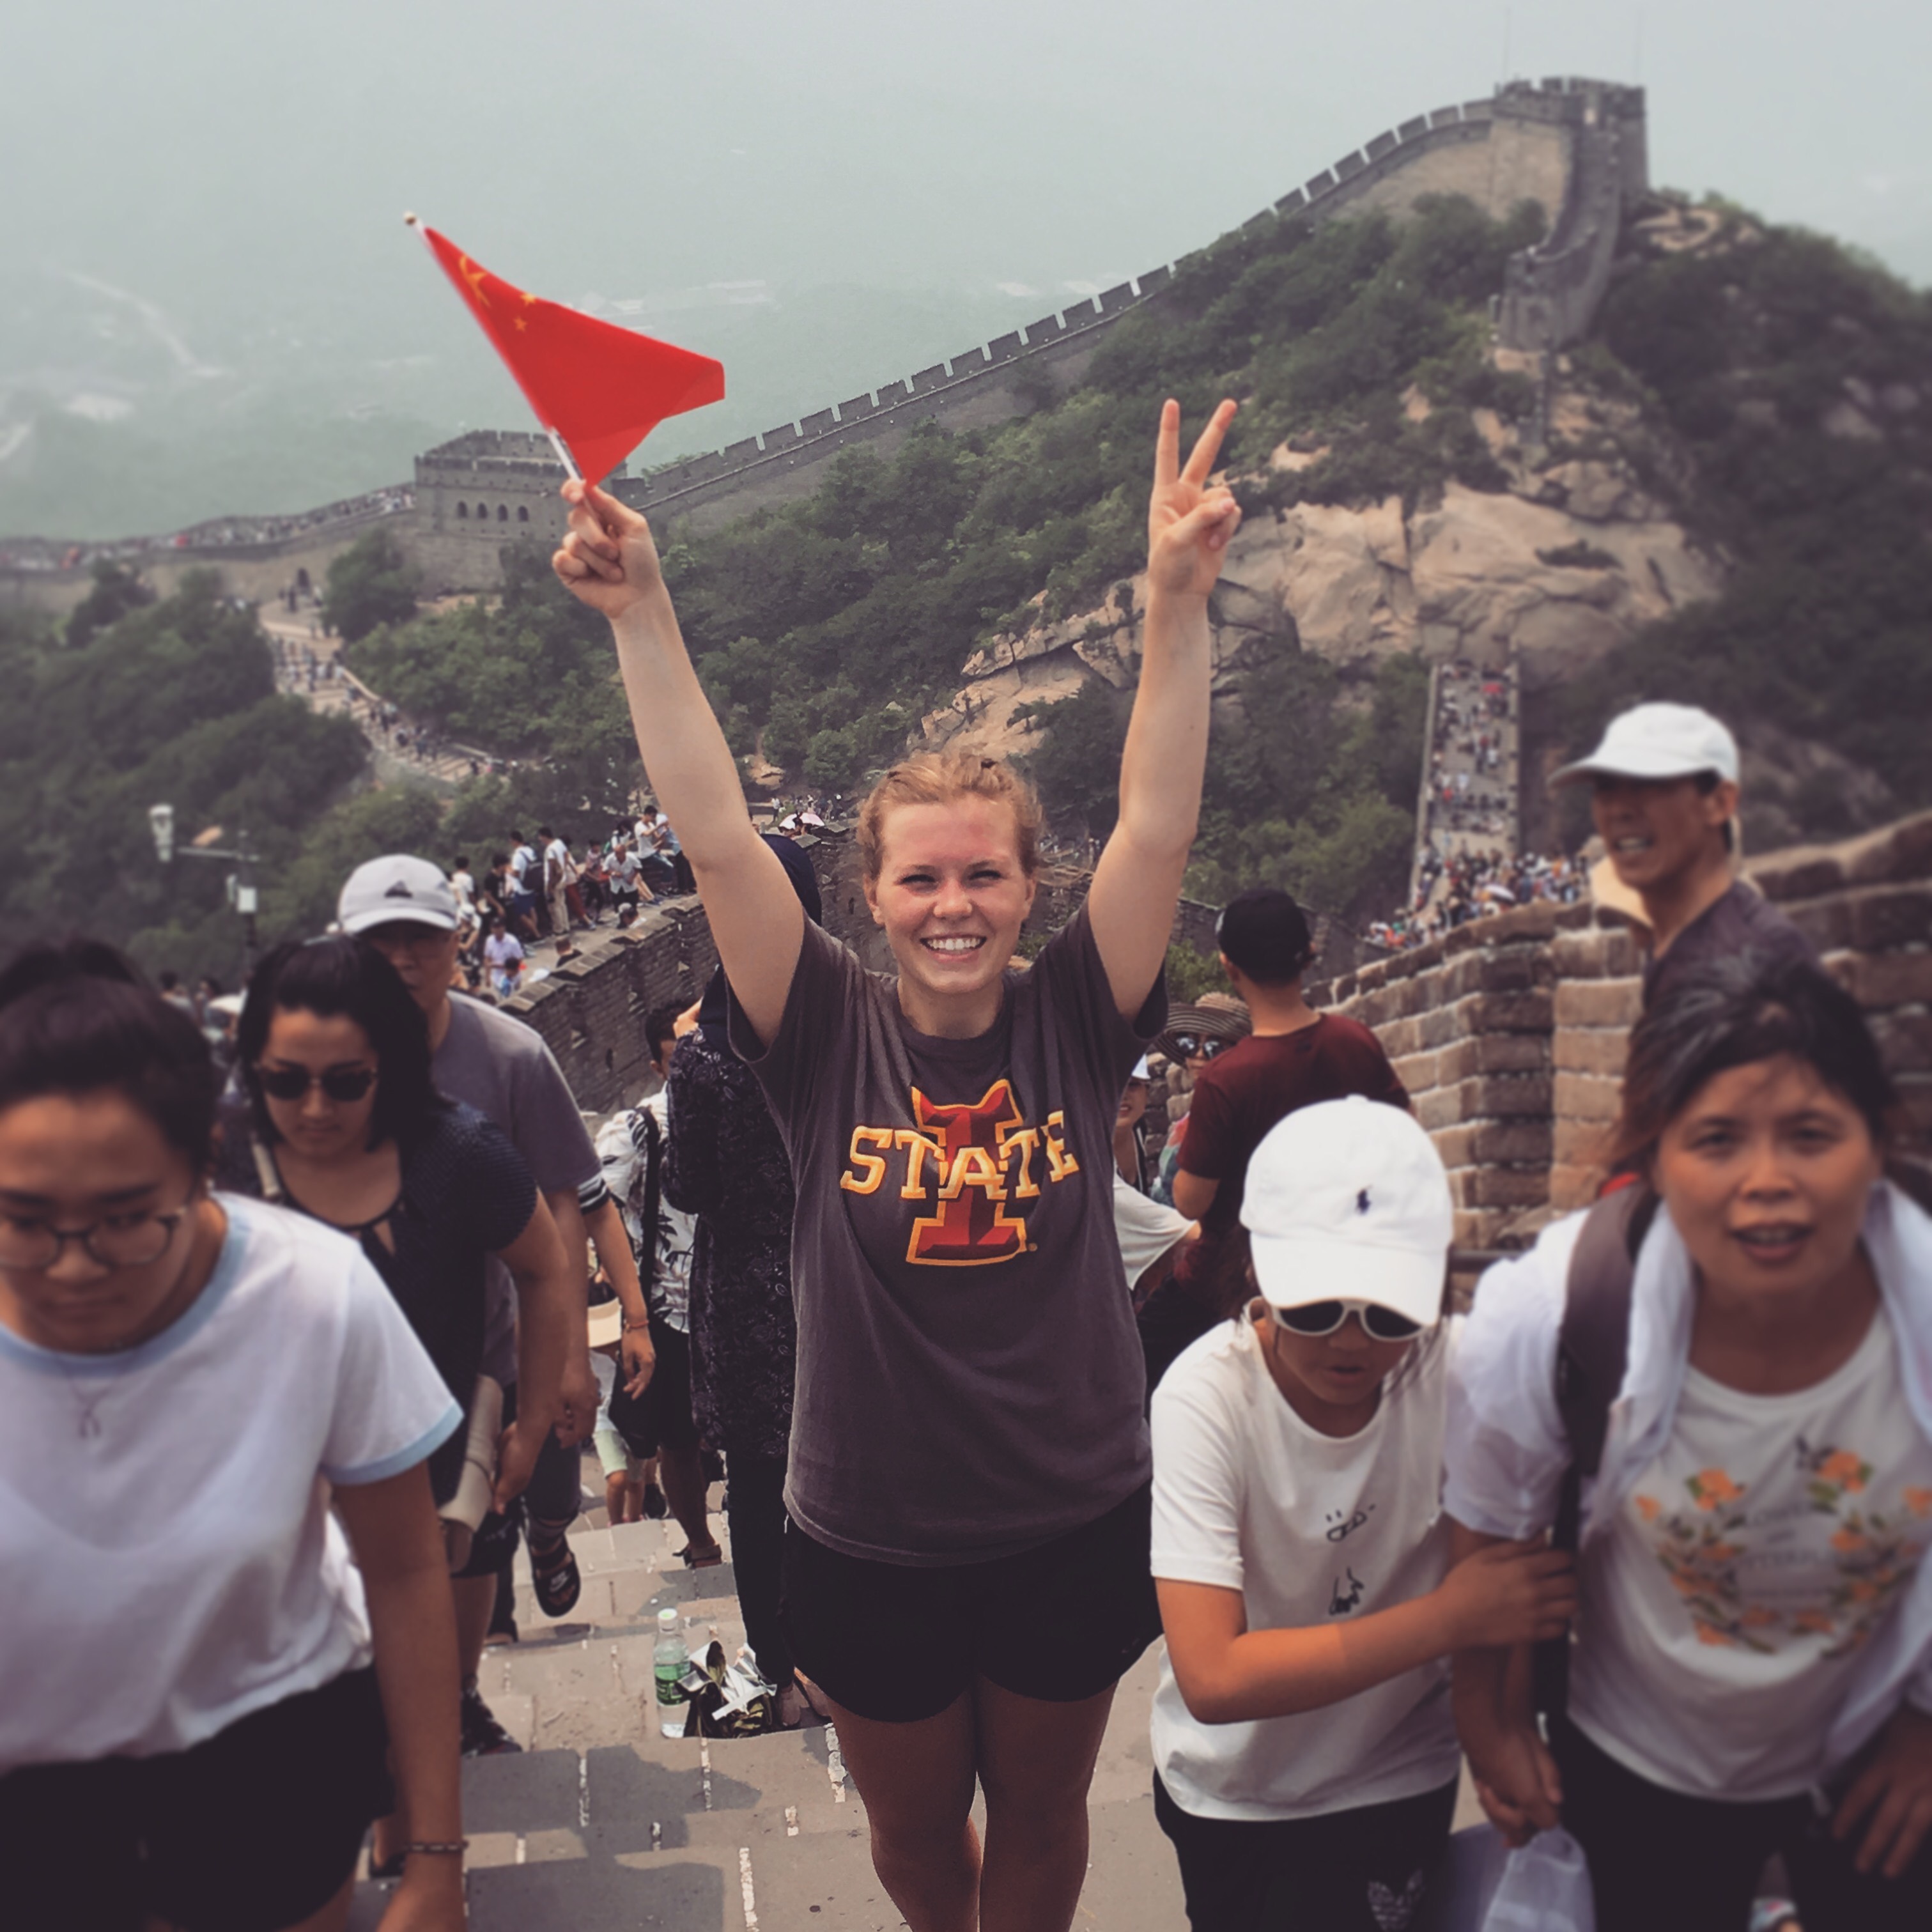 Student wearing ISU t-shirt stands with arms in the air on the Great Wall of China.